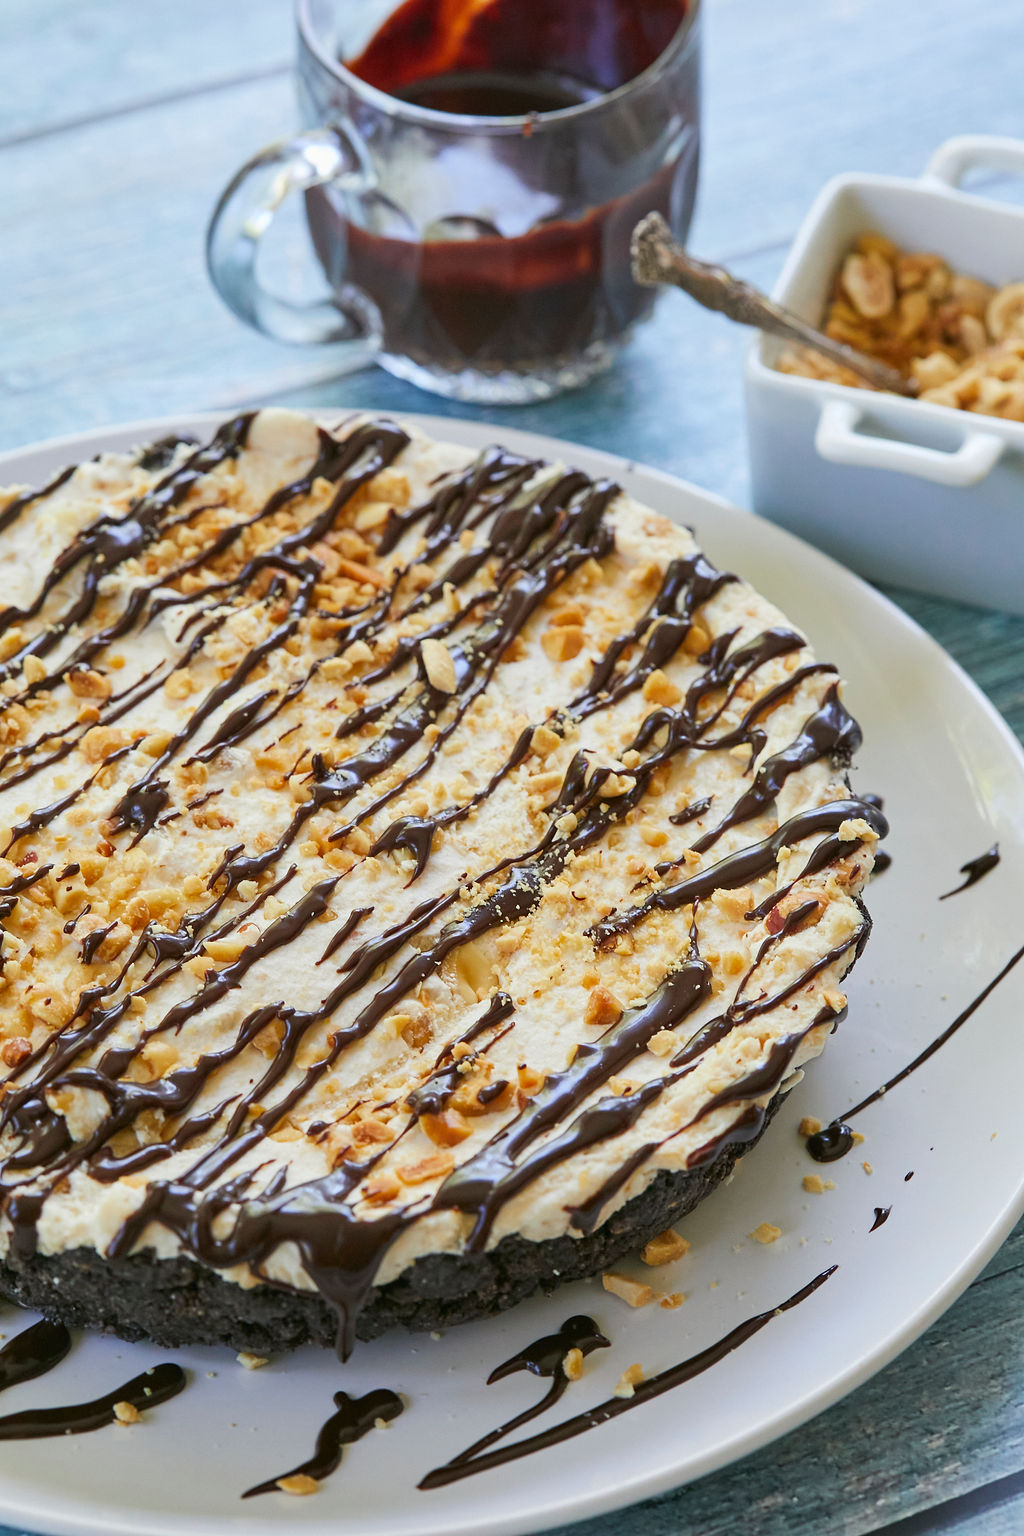 Peanut Butter Fudge Ice Cream Pie, topped with peanuts.